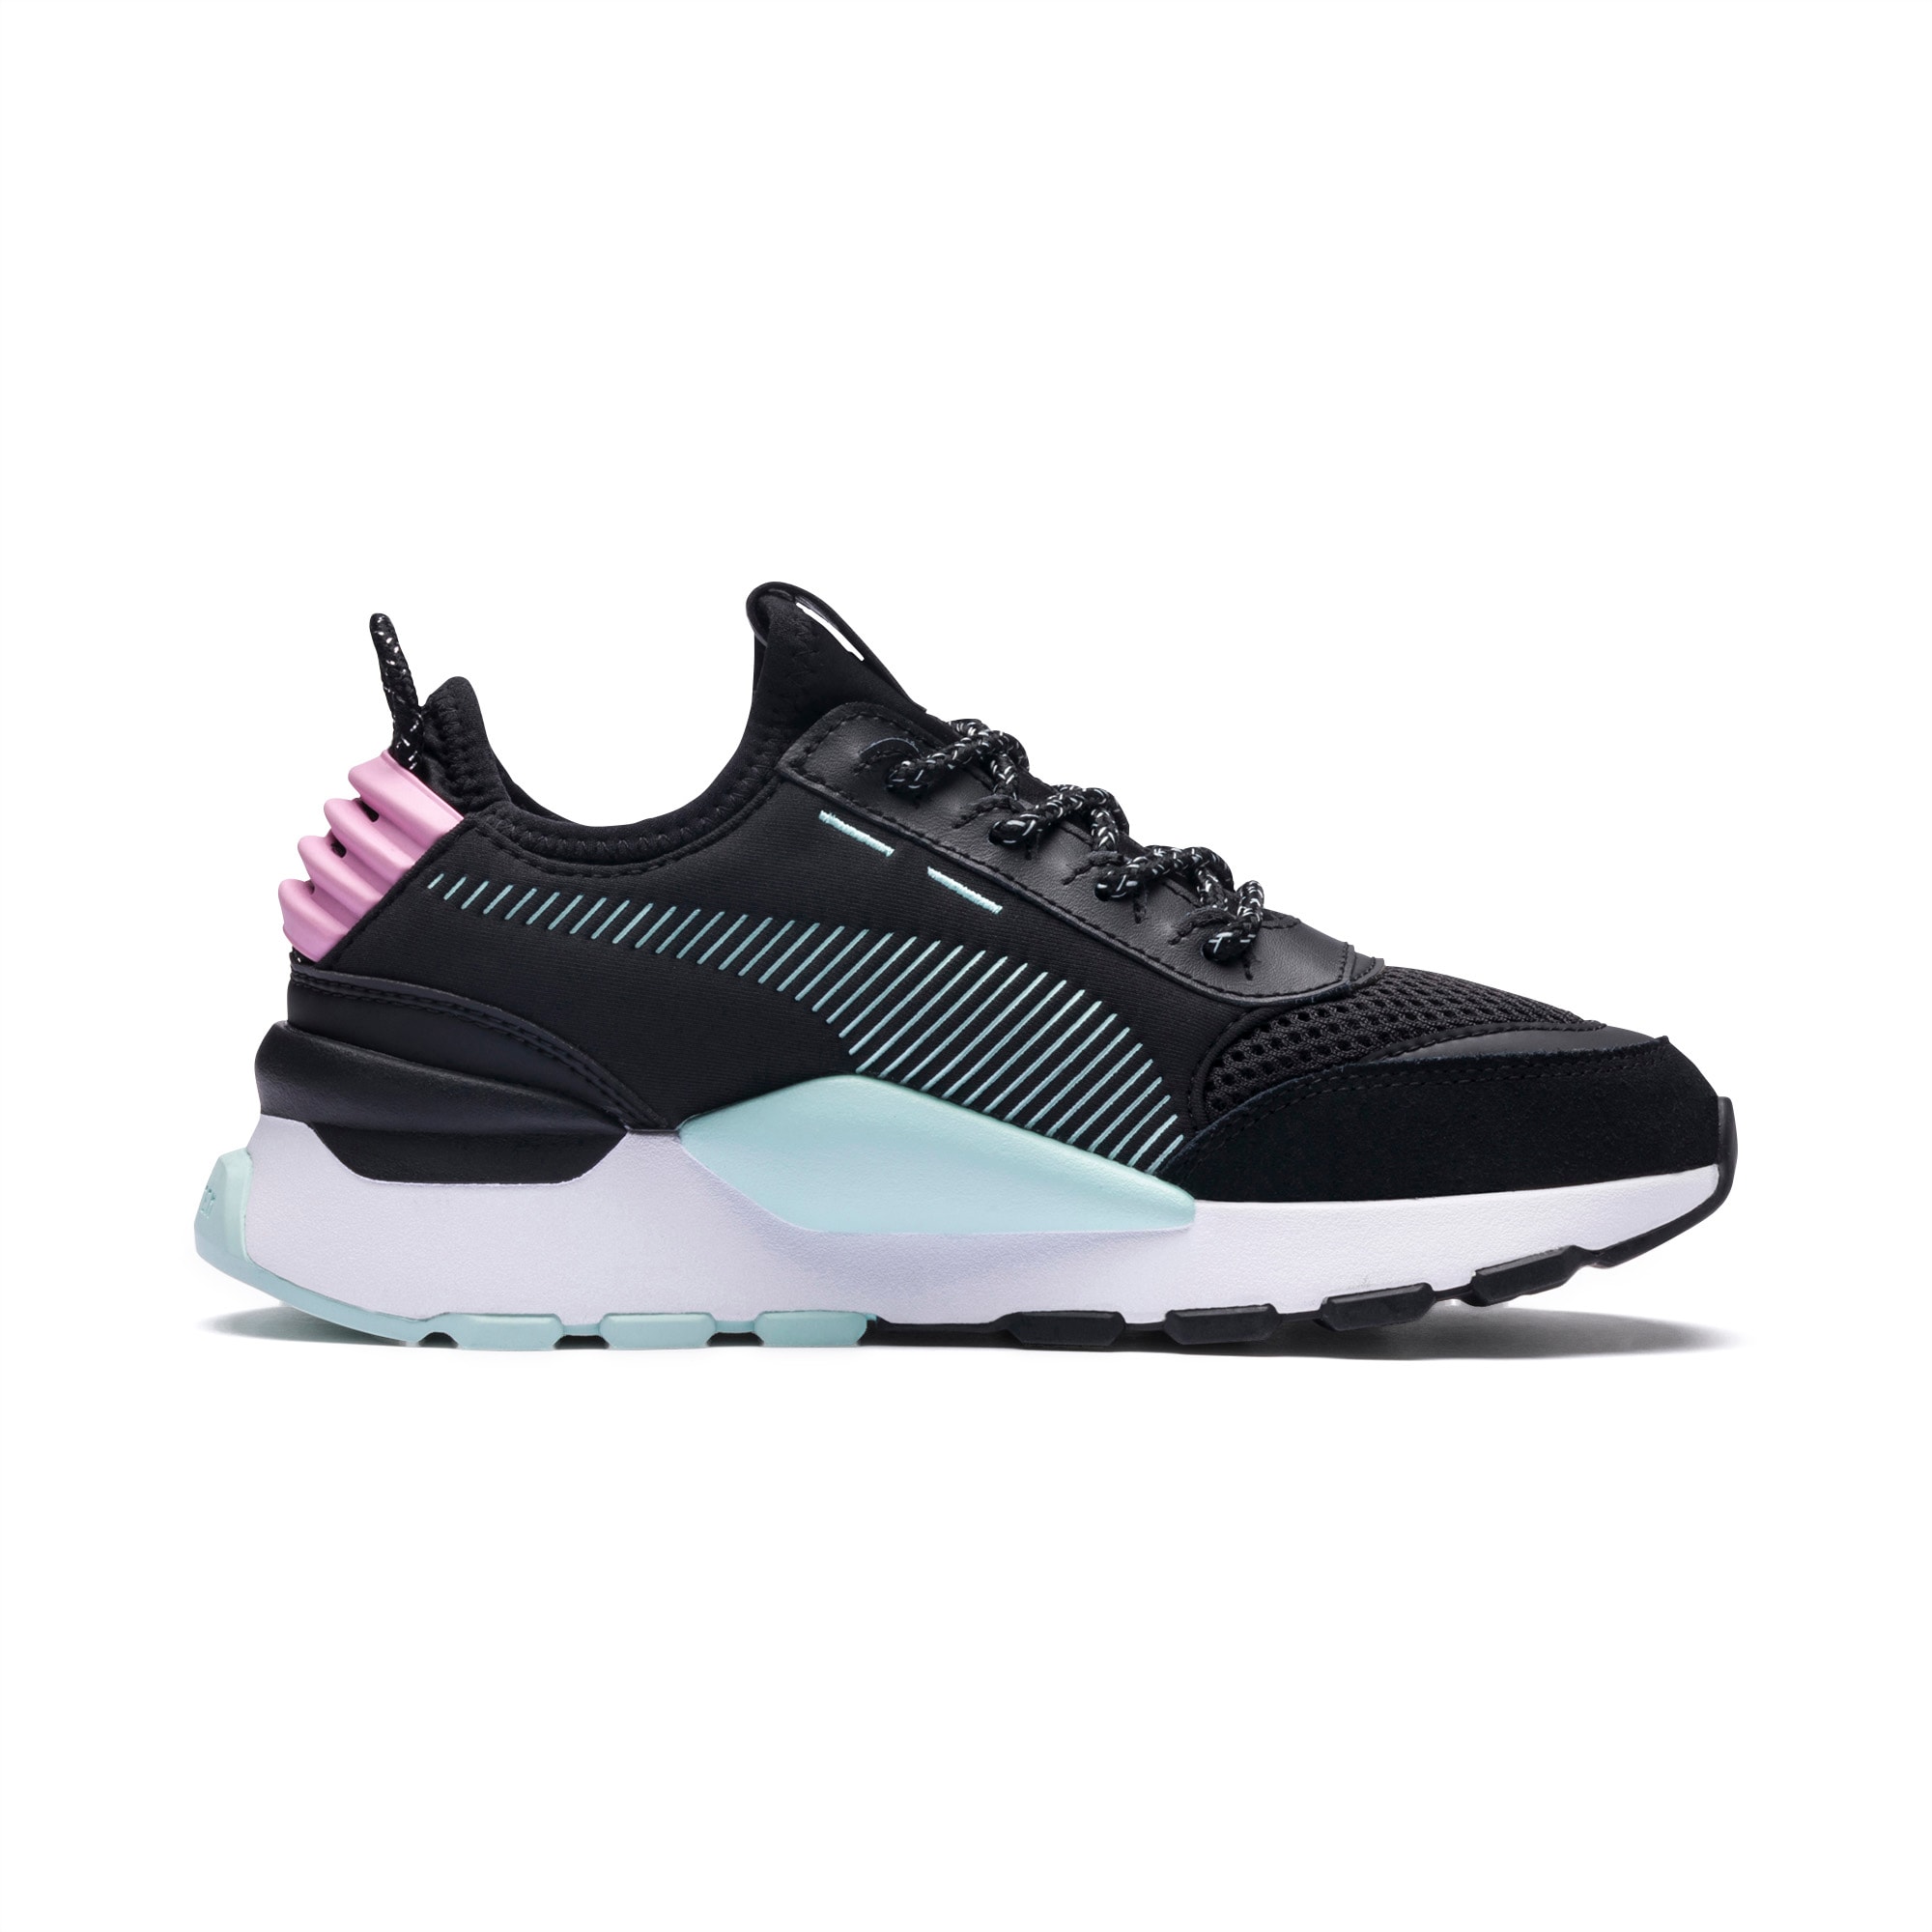 RS-0 Winter Inj Toys Sneakers | PUMA